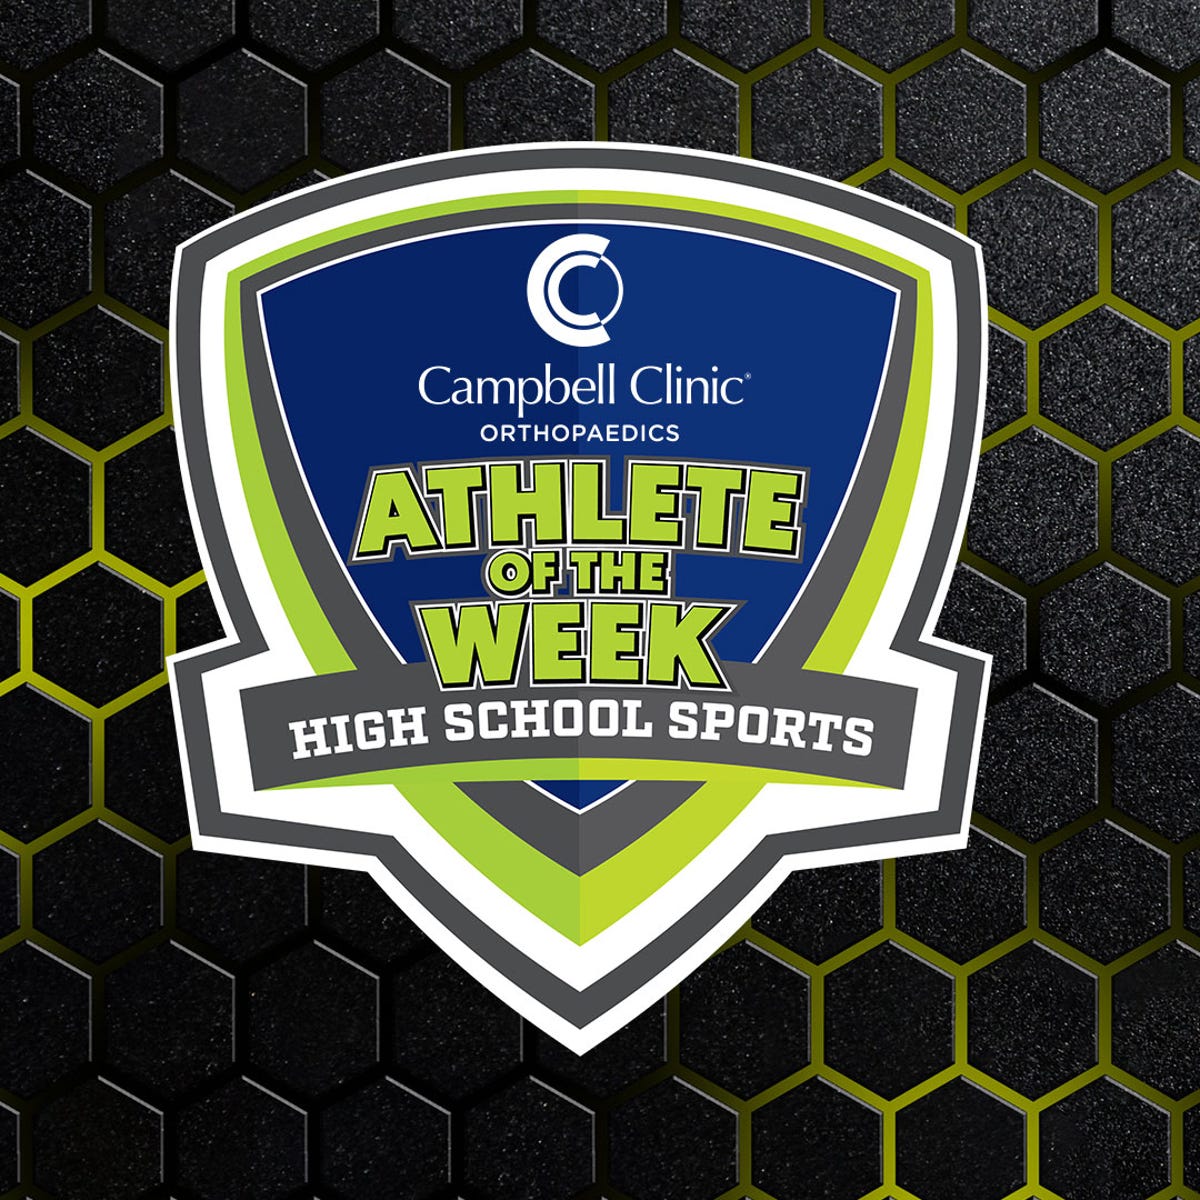 Vote for the Campbell Clinic Girls High School Athlete of the Week – Top Performances in High School Female Basketball